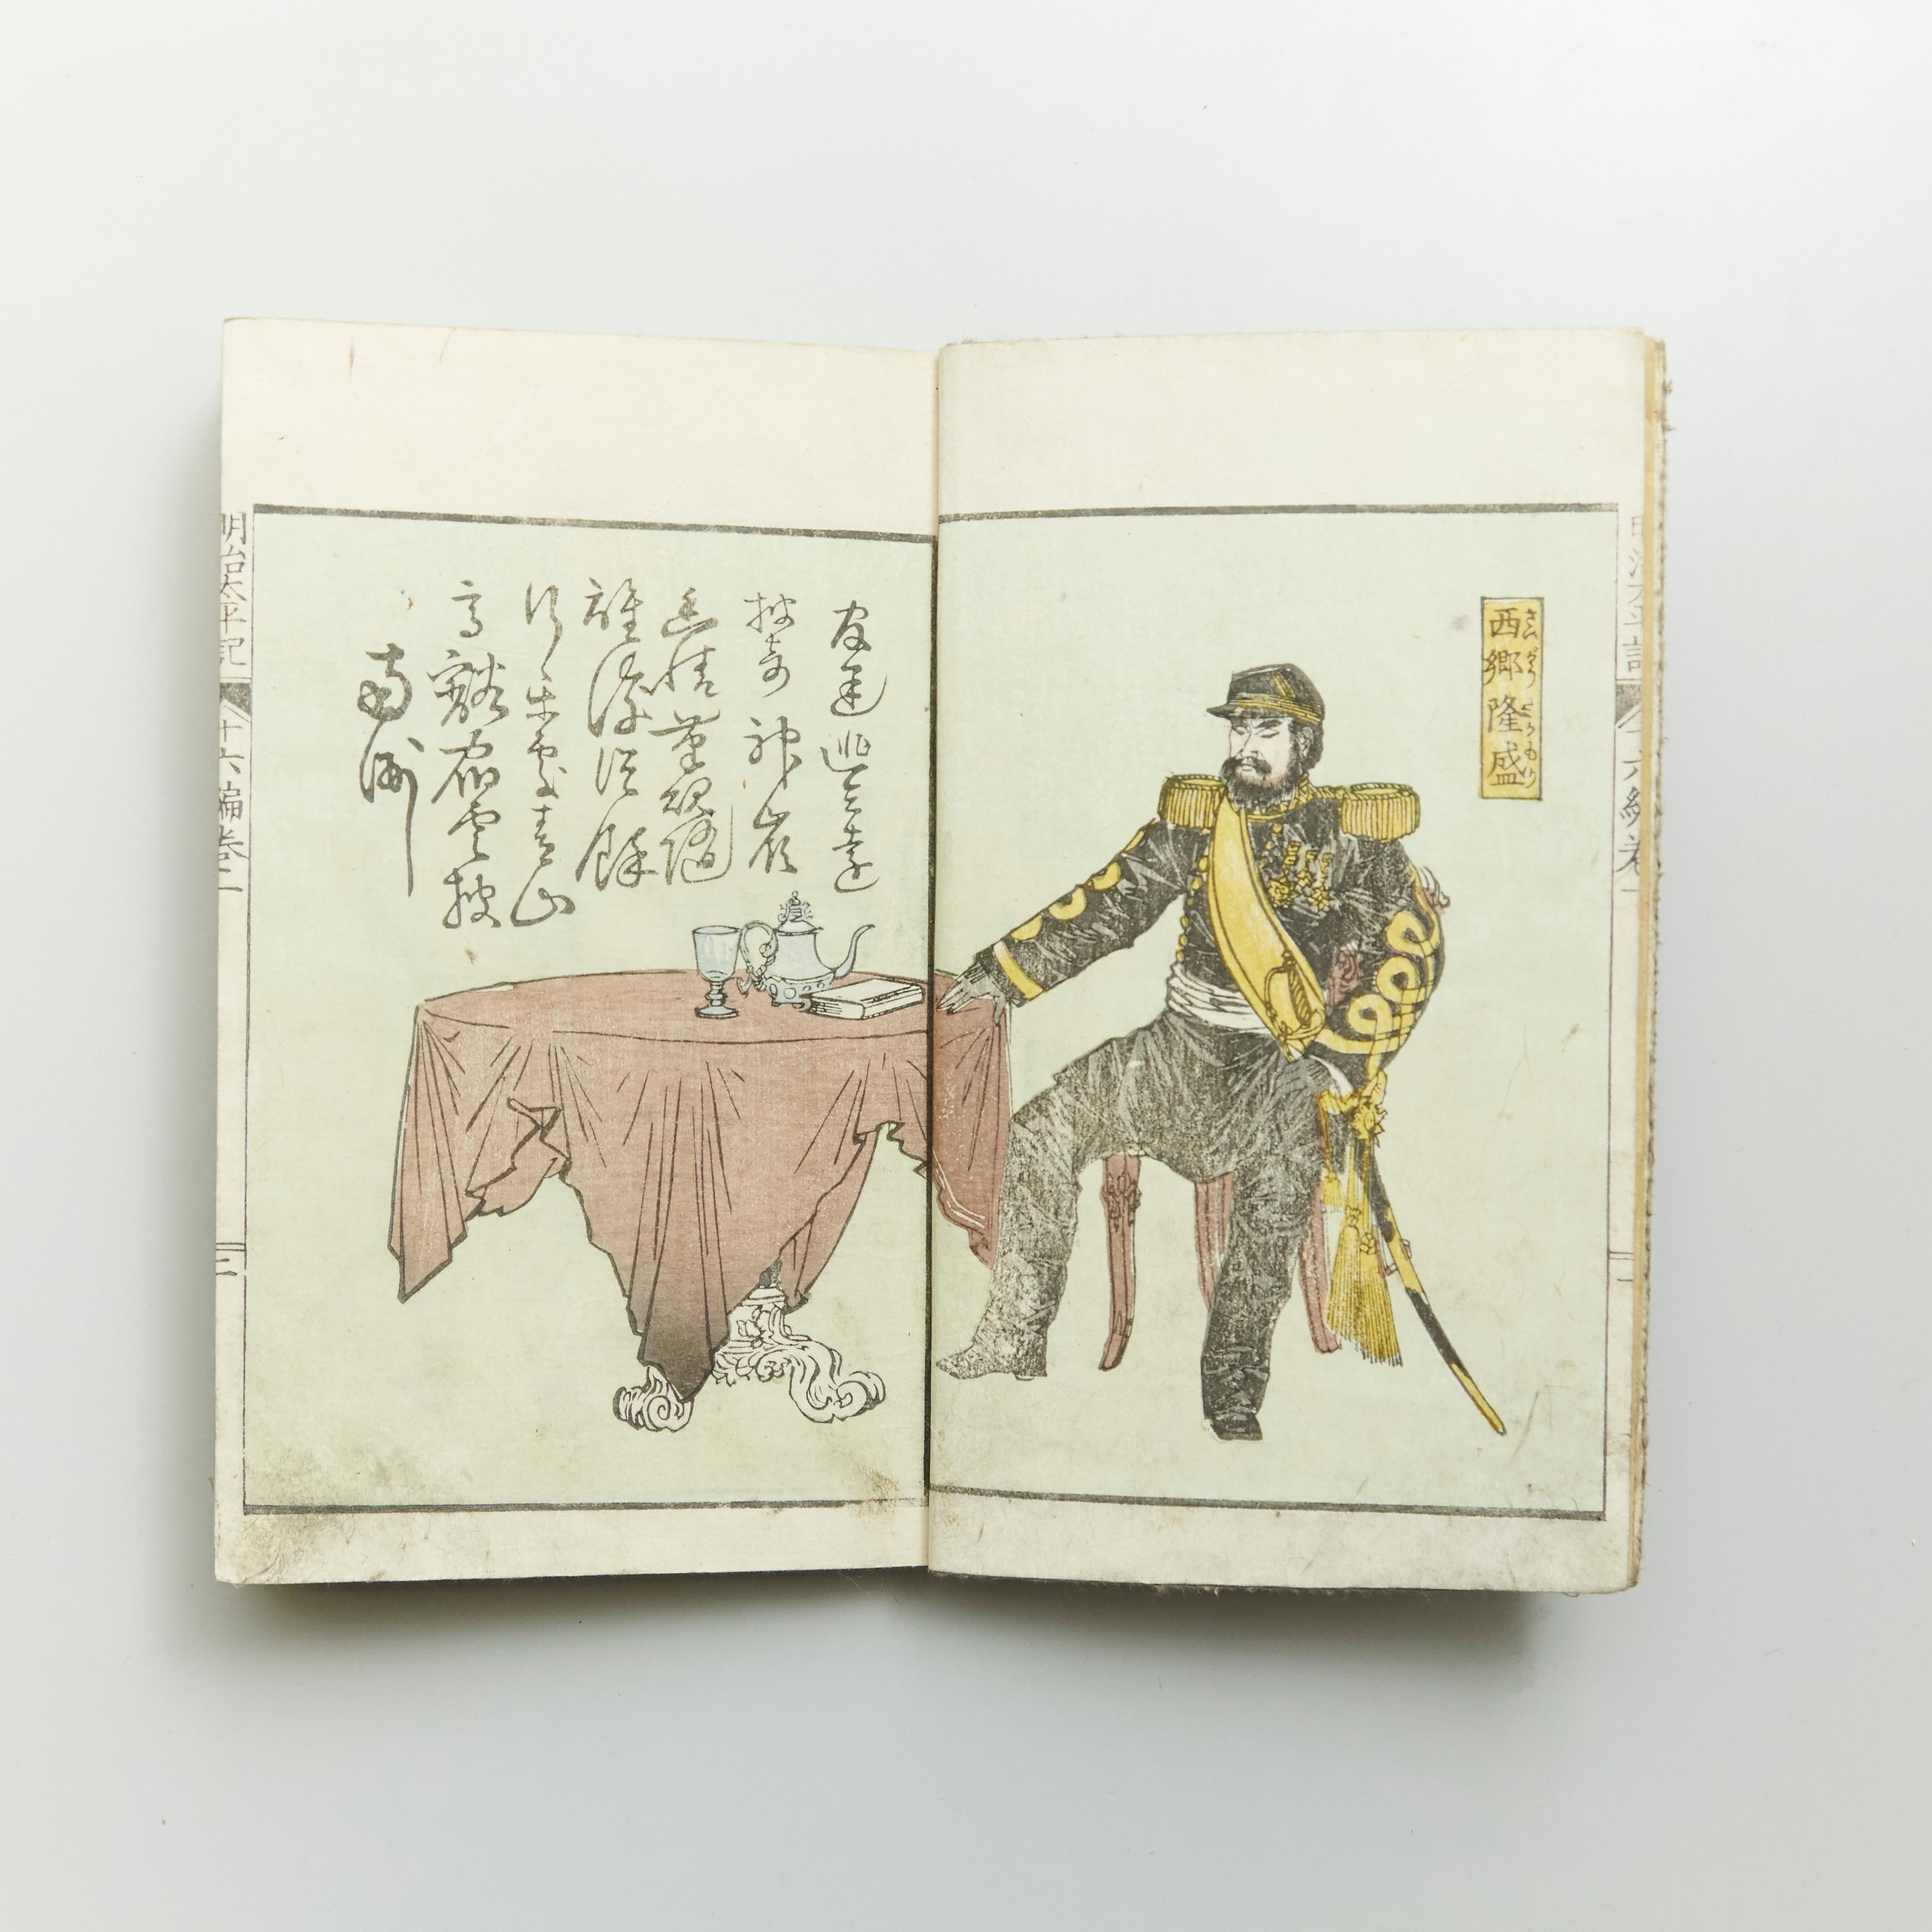 Antique Japanese History book Meiji era, circa 1878
Woodblock print book

Book dimensions: 182 mm x 121 mm

There are damages because it is antique item as we show on the photos.